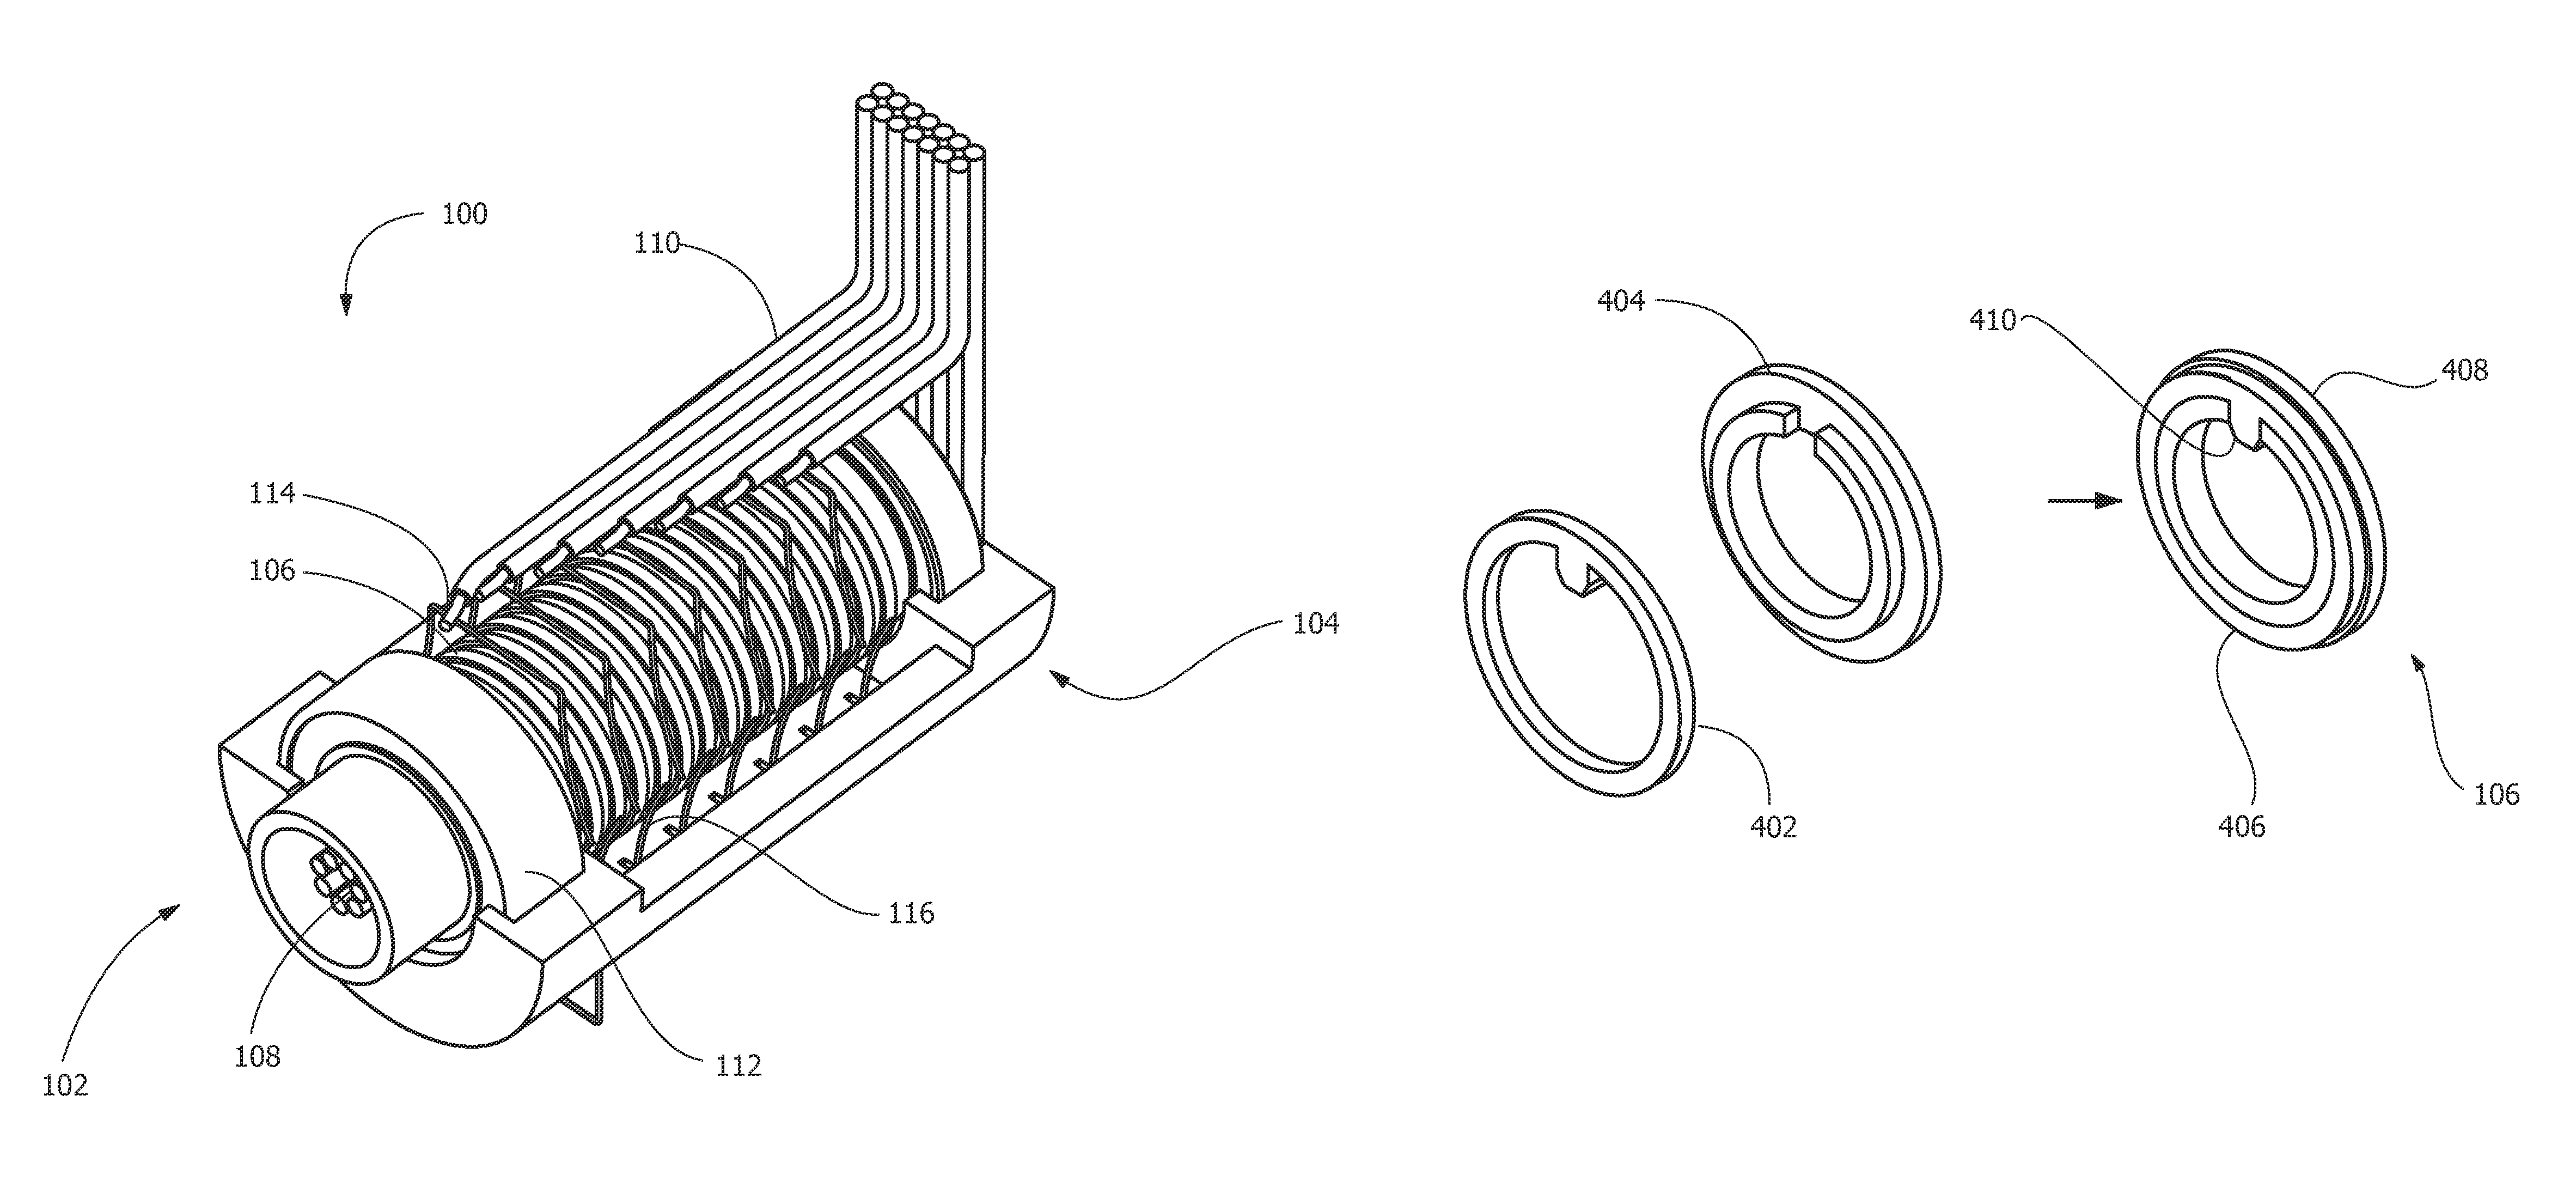 Method of fabricating a slip ring component